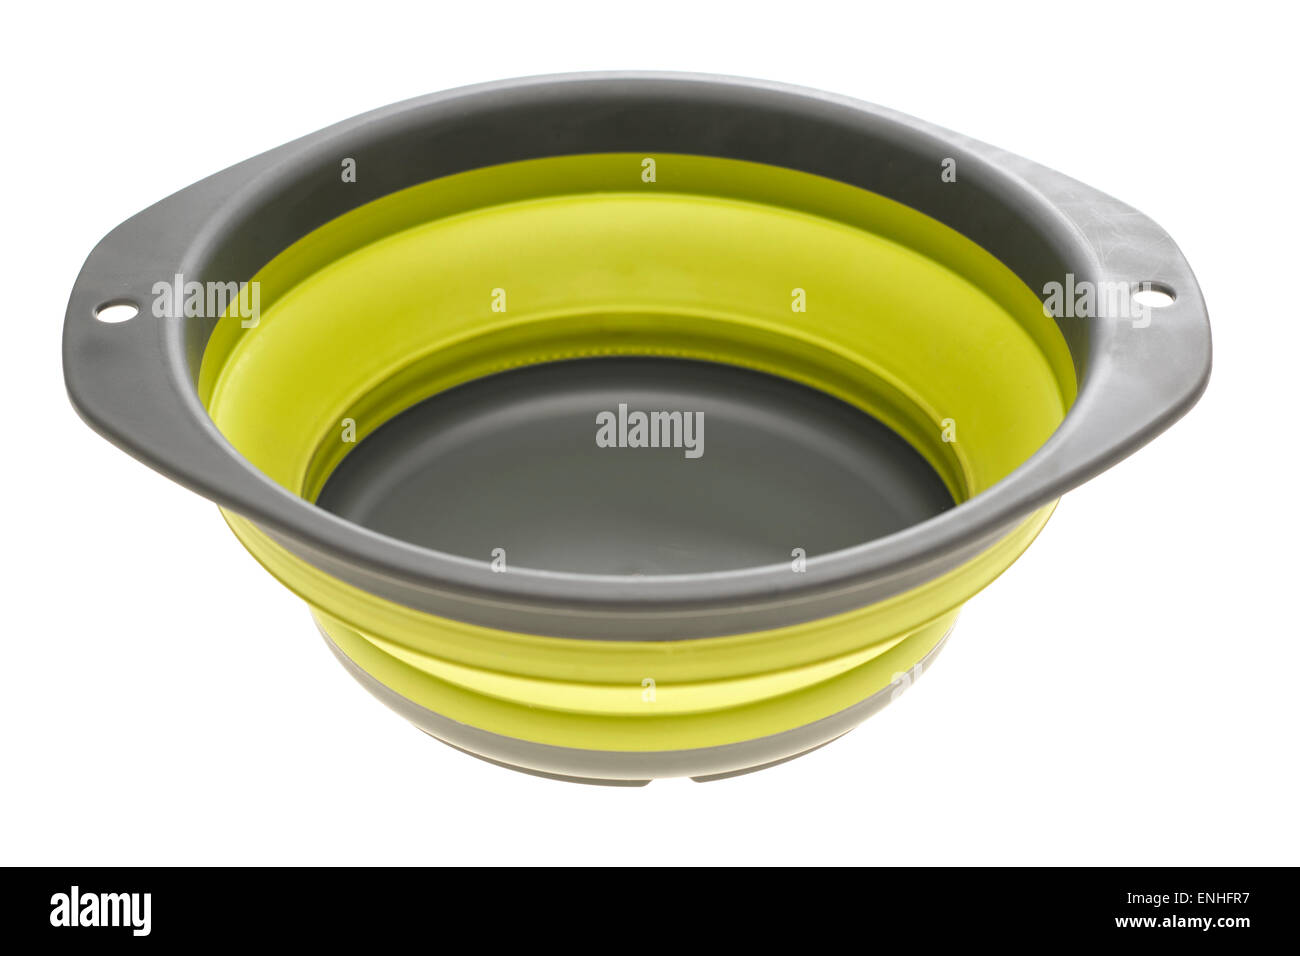 Collapsible camping silicone bowl Stock Photo